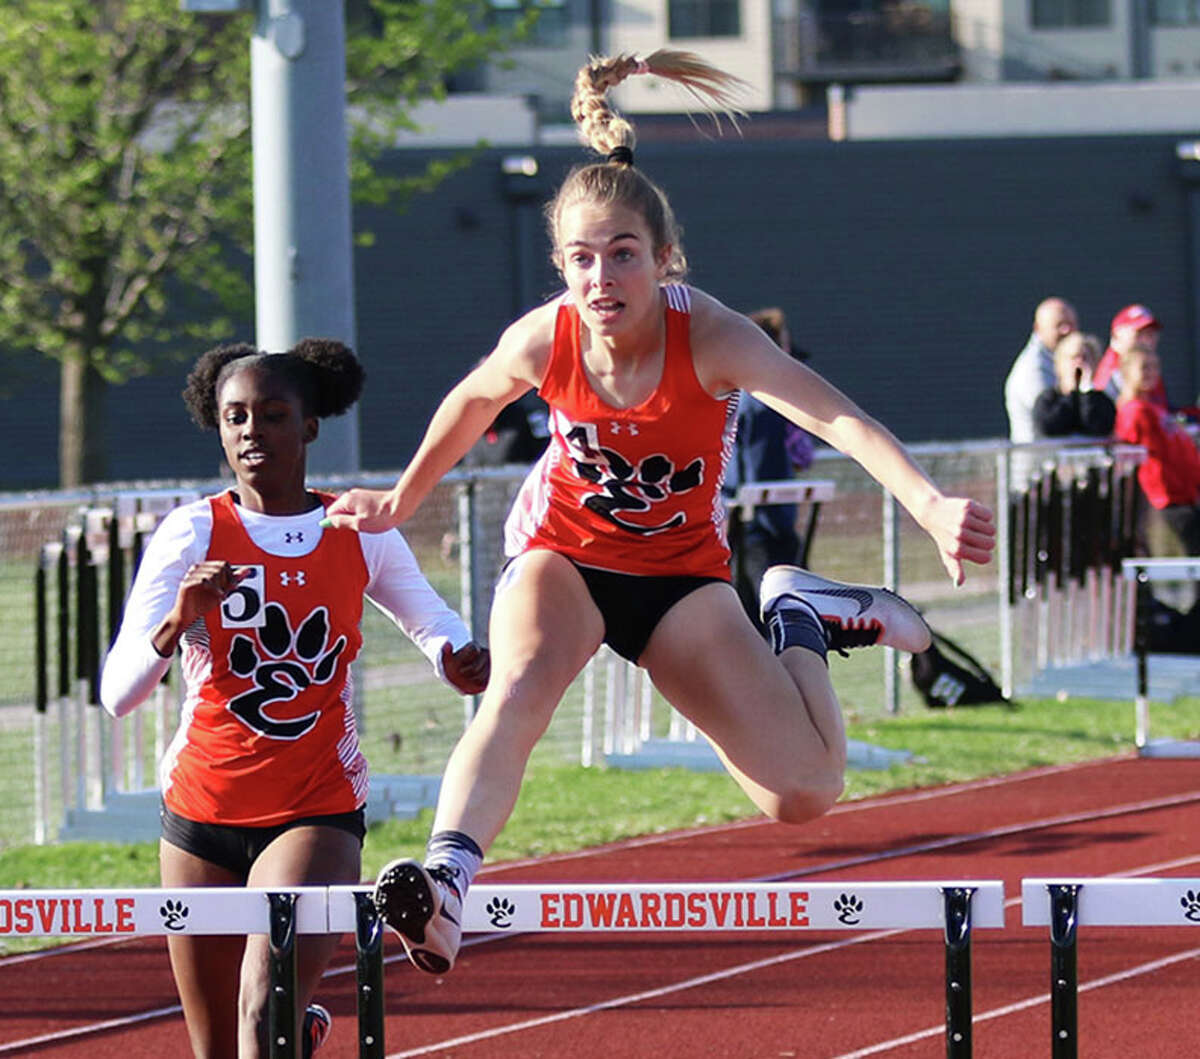 Edwardsville's Blakely Hockett (right) clears a hurdle ahead of teammate Sydnee Campbell in the 300-meter hurdles on Tuesday at the Madison County large-schools girls track meet in Edwardsville. Hockett won the race, with Campbell in second.